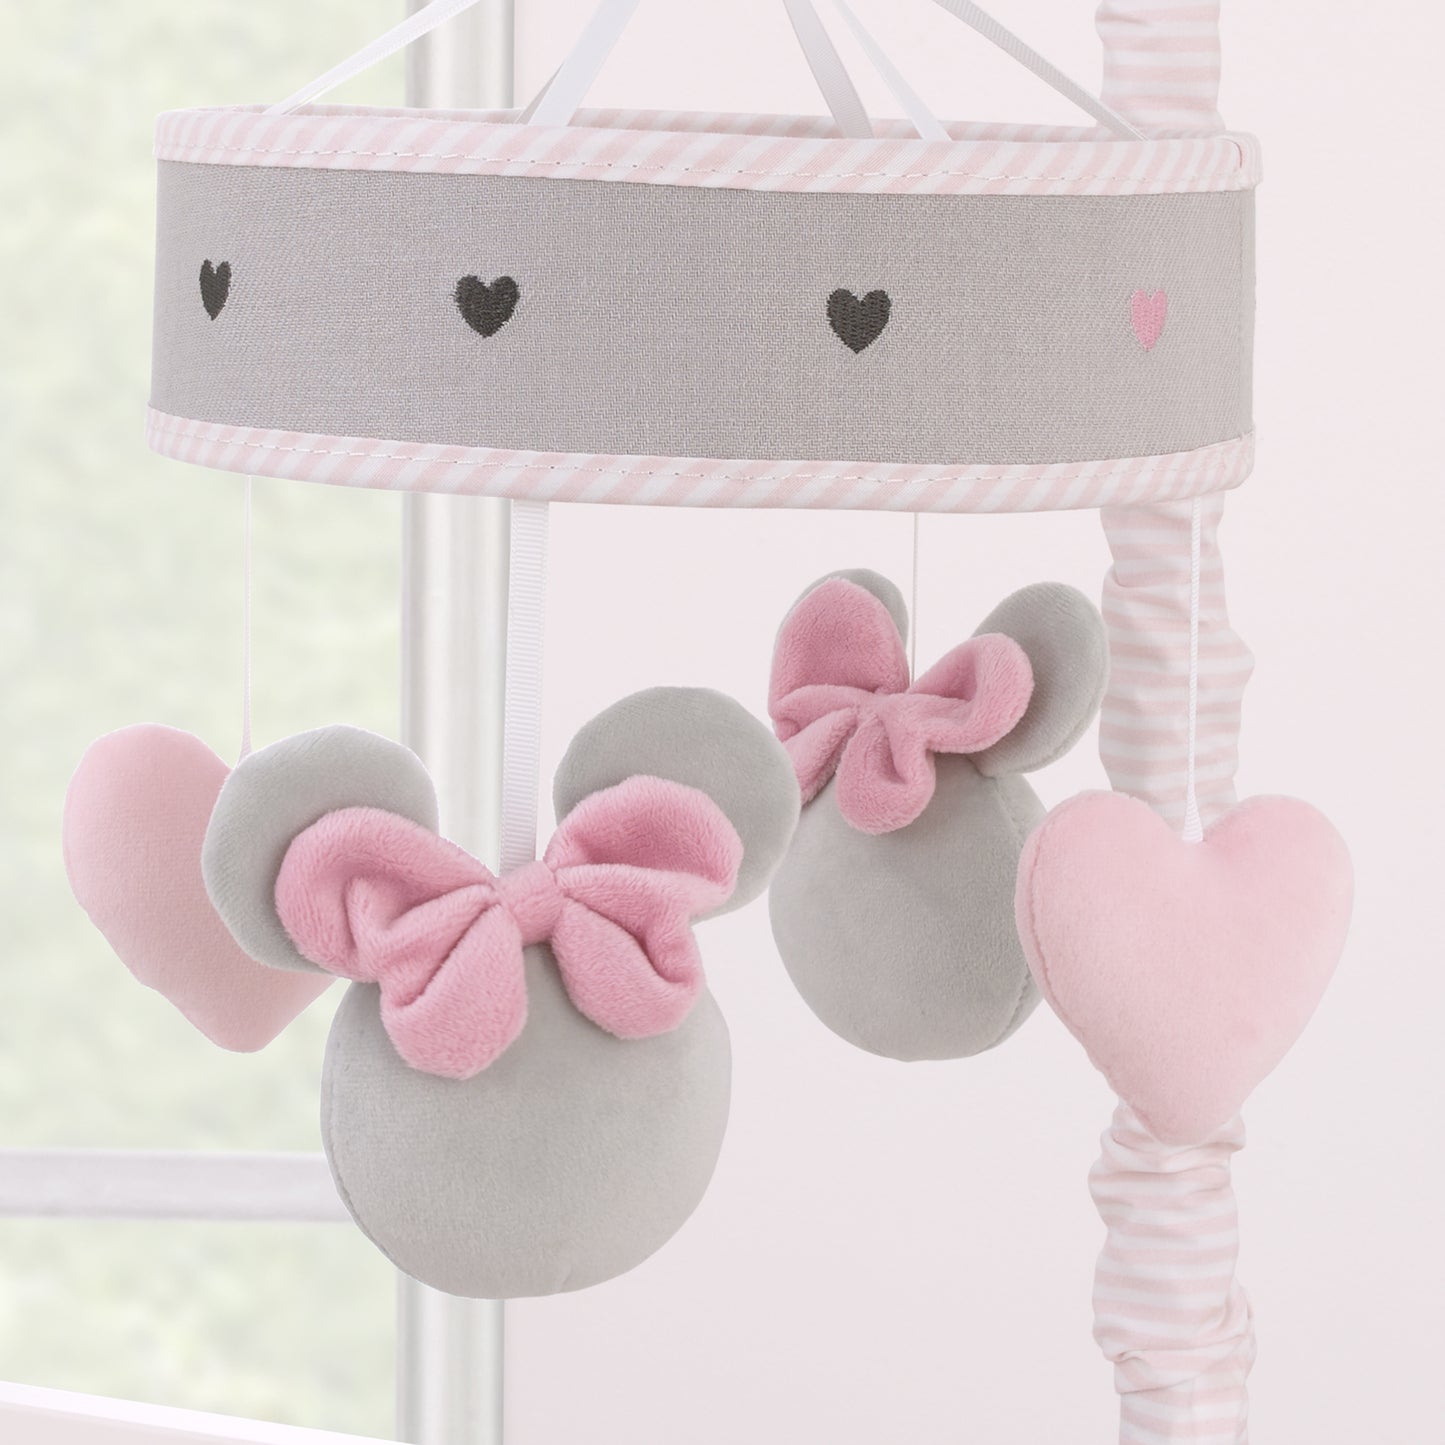 Disney Minnie Mouse My Happy Place Pink, Gray, and White Plush Musical Mobile